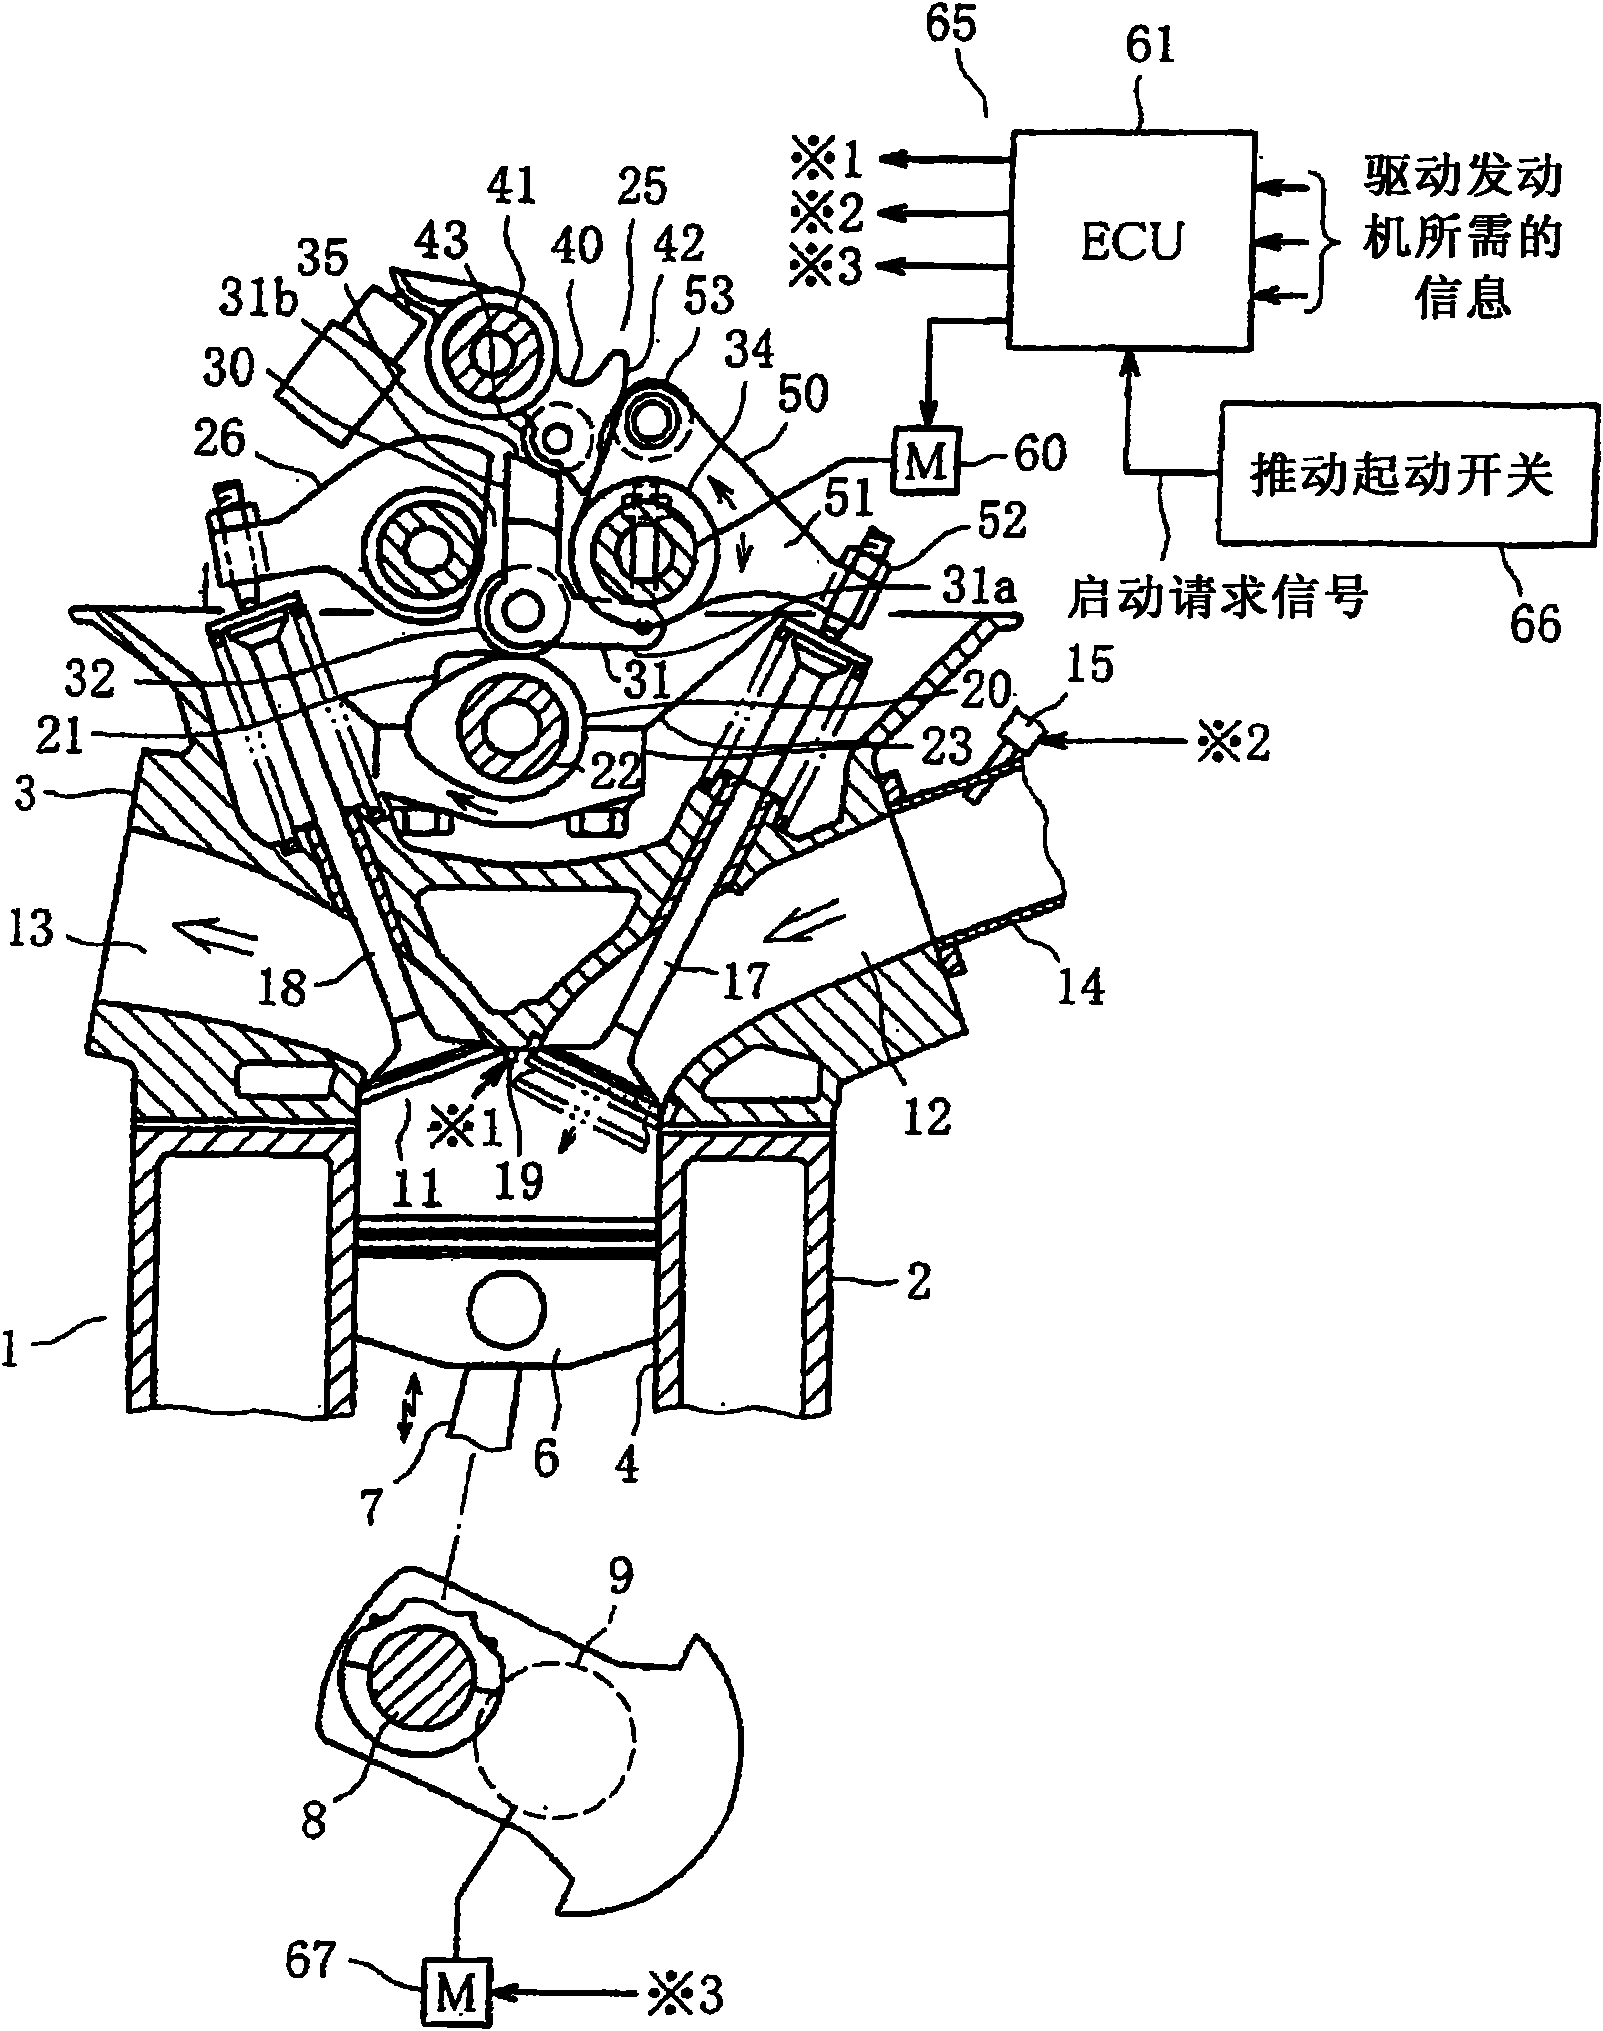 Start control device of internal combustion engine